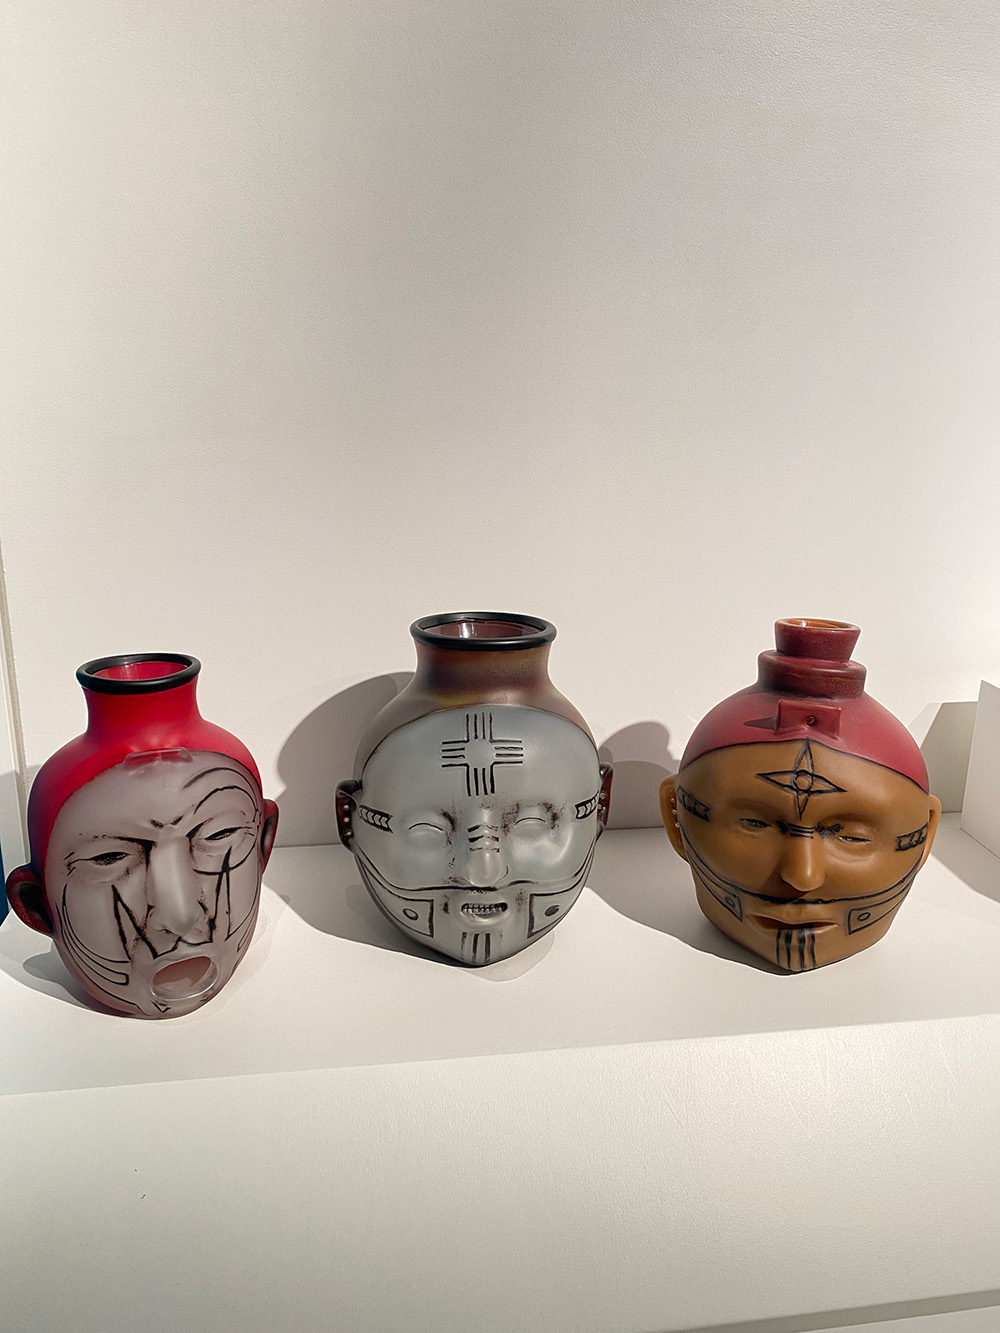 Three vases withi faces on them